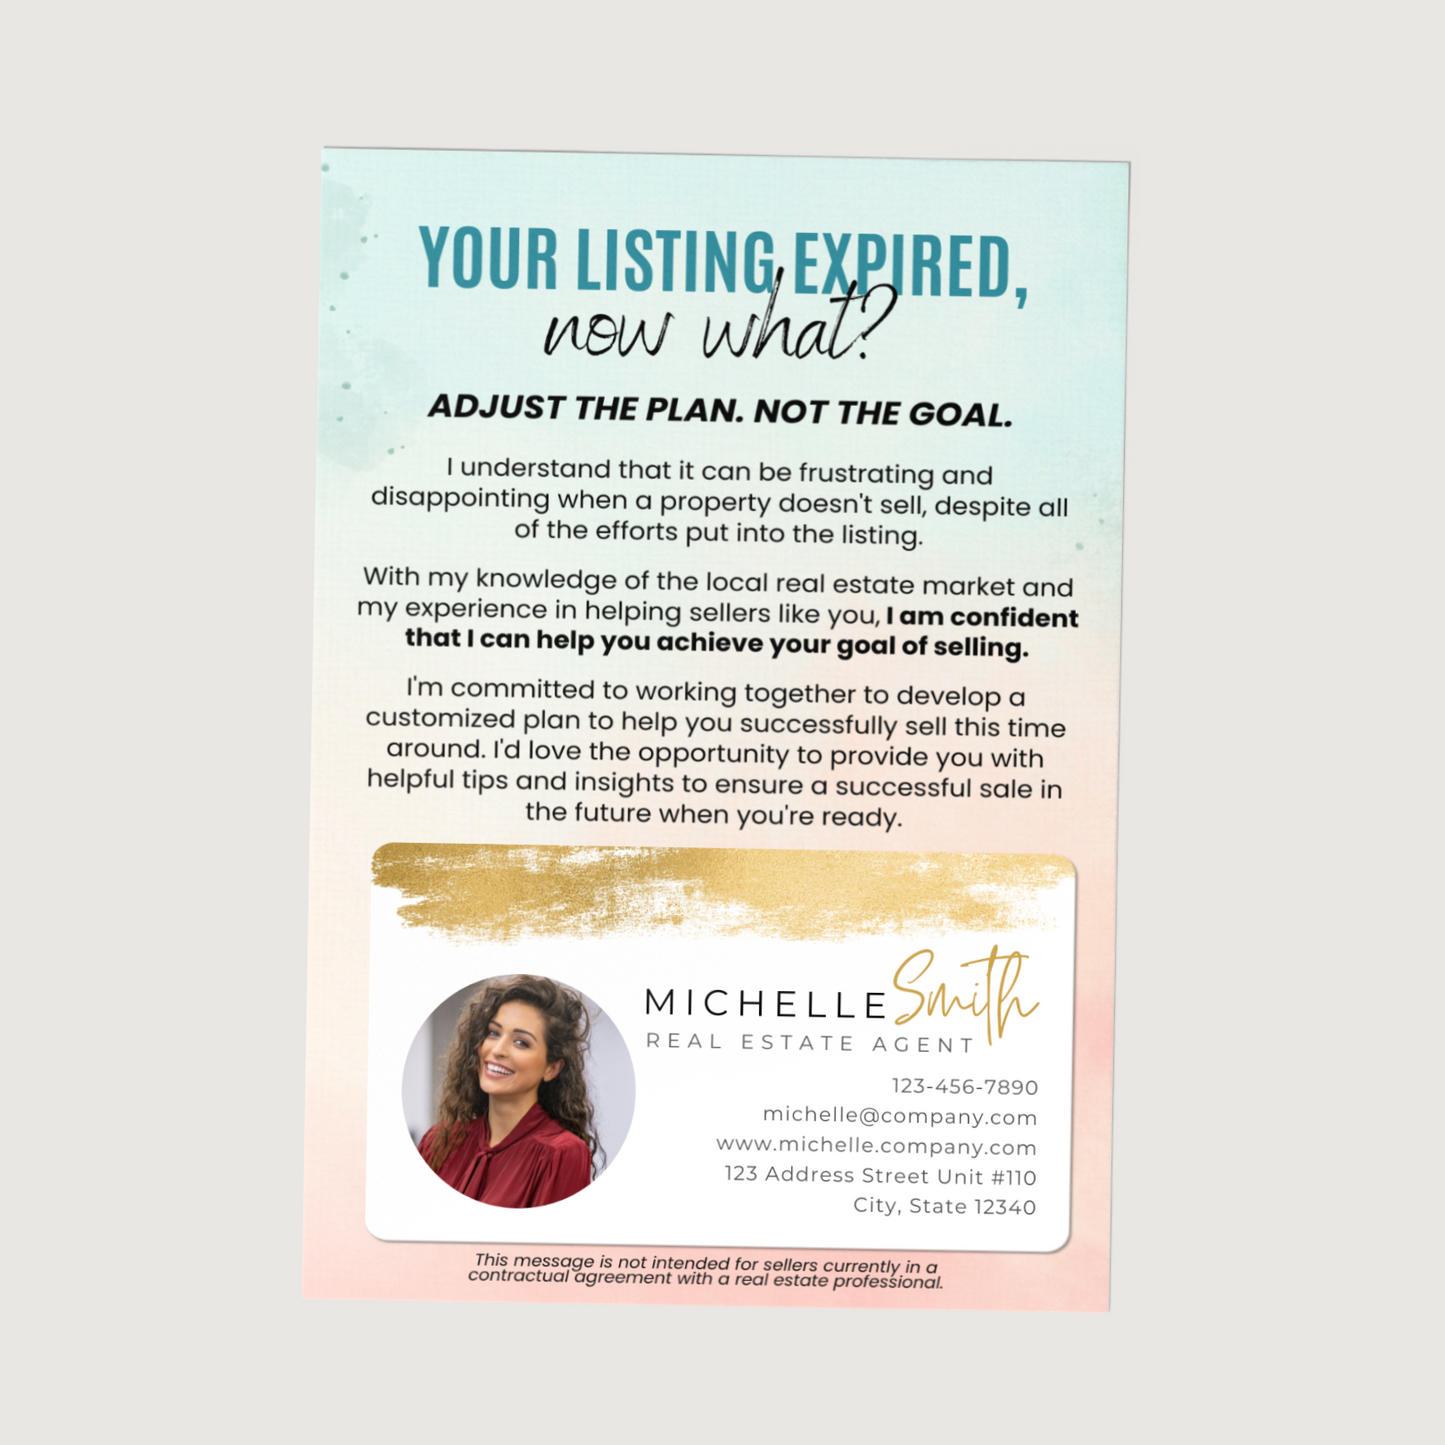 Your Listing Expired, Now What? - Set of Real Estate Expired Listing Mailers